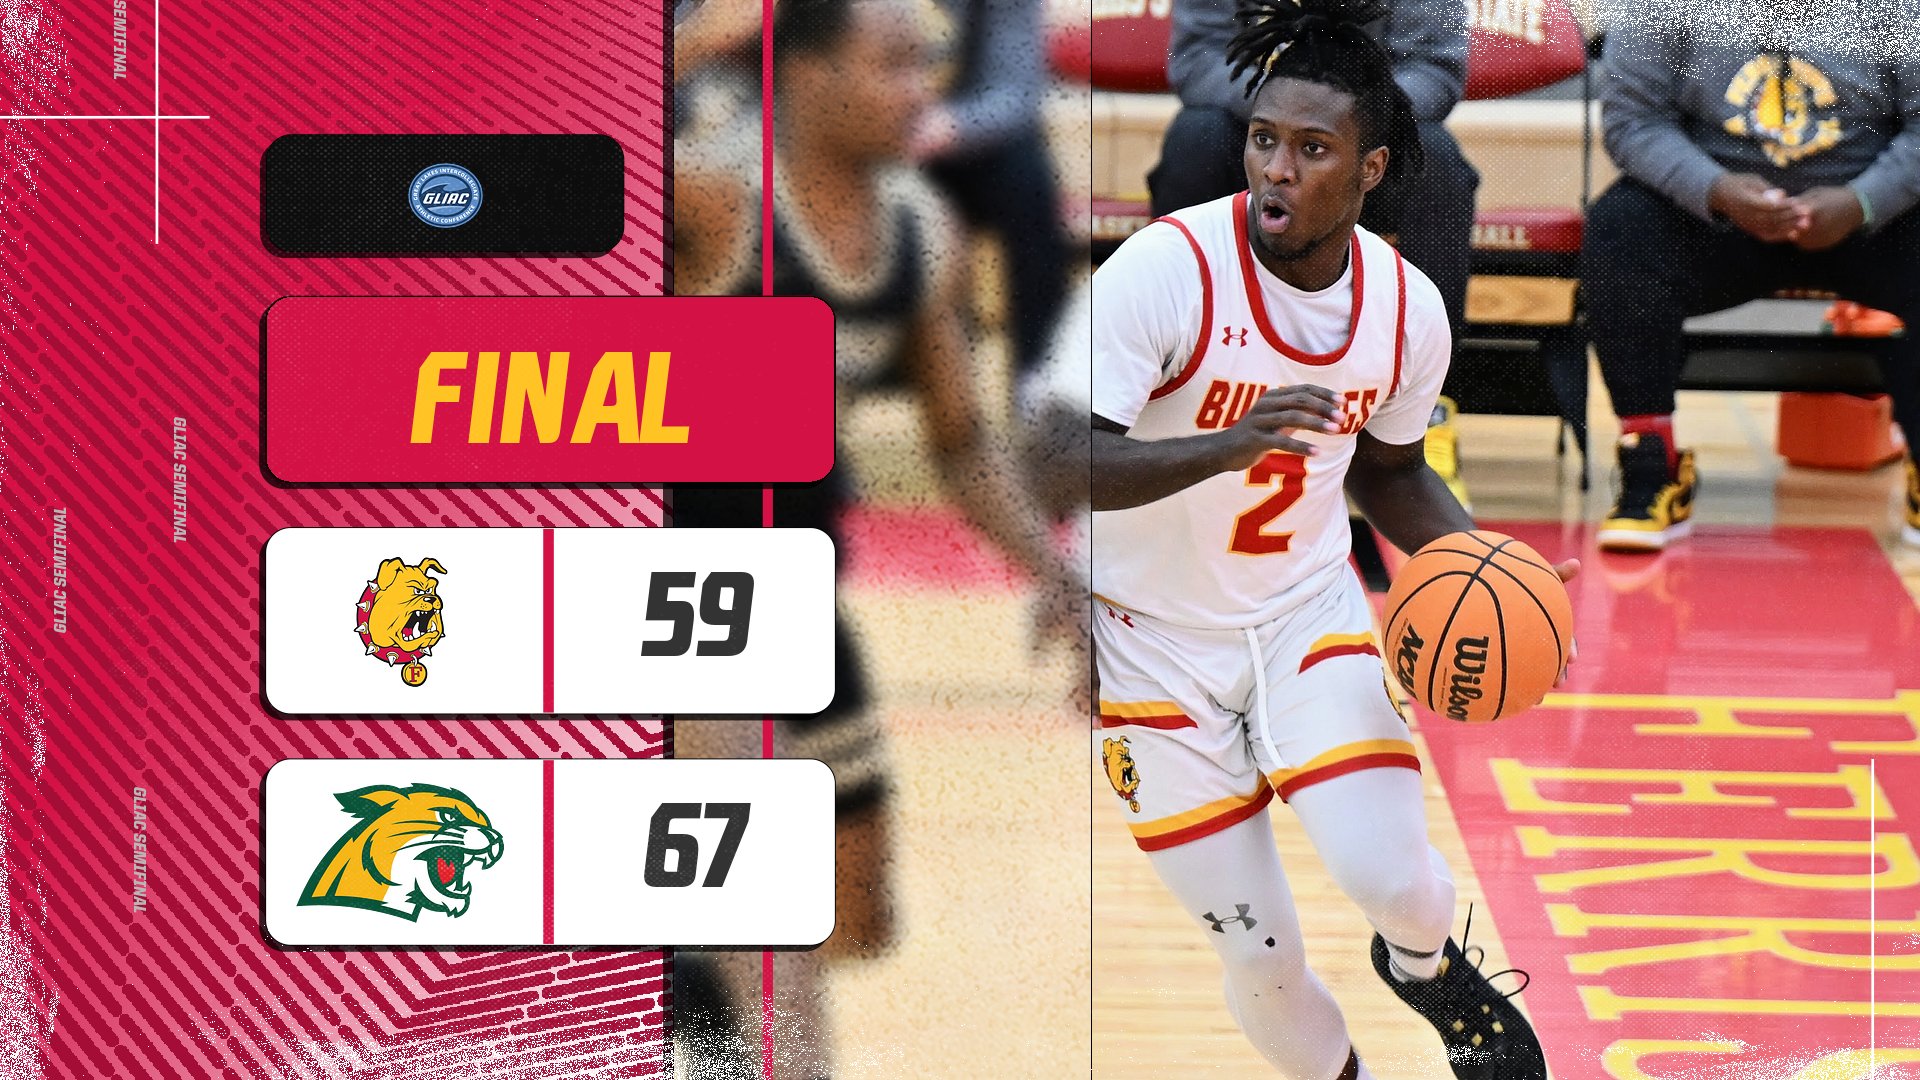 Ferris State Falls To Northern Michigan In GLIAC Tourney Semifinals; Awaits NCAA Selection Show